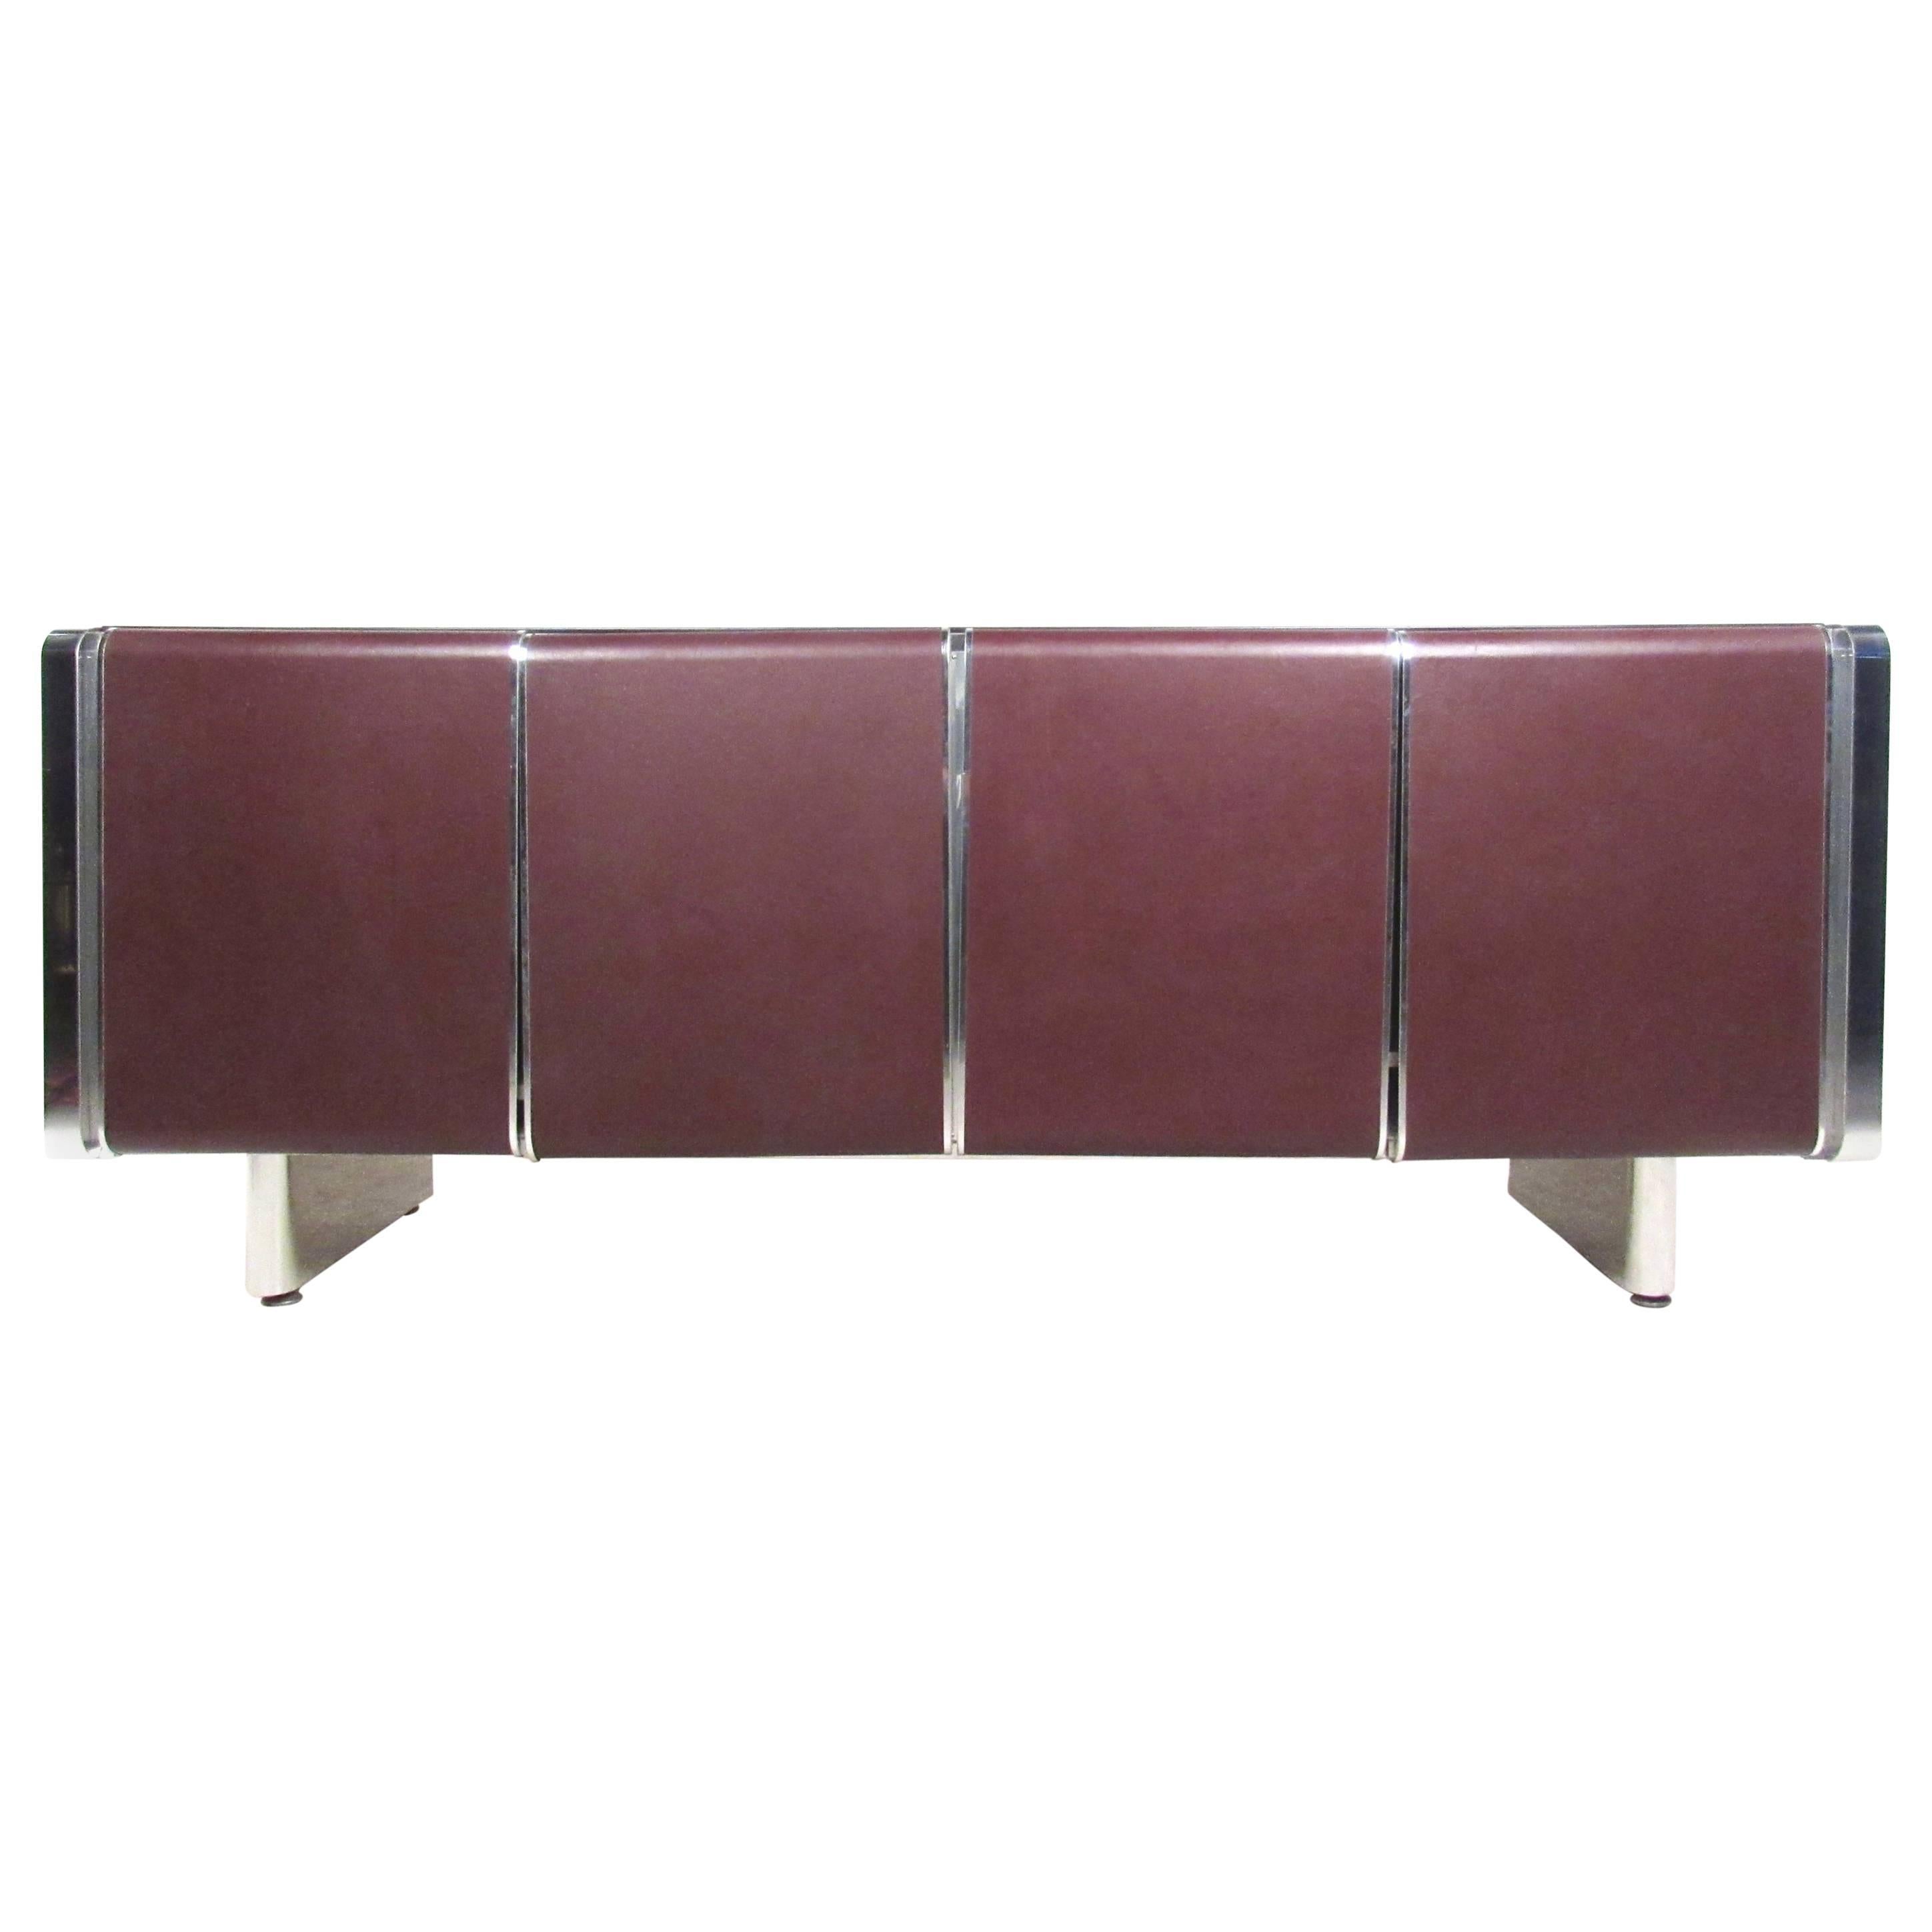 Vintage Modern Chrome and Leatherette Front Italian Sideboard